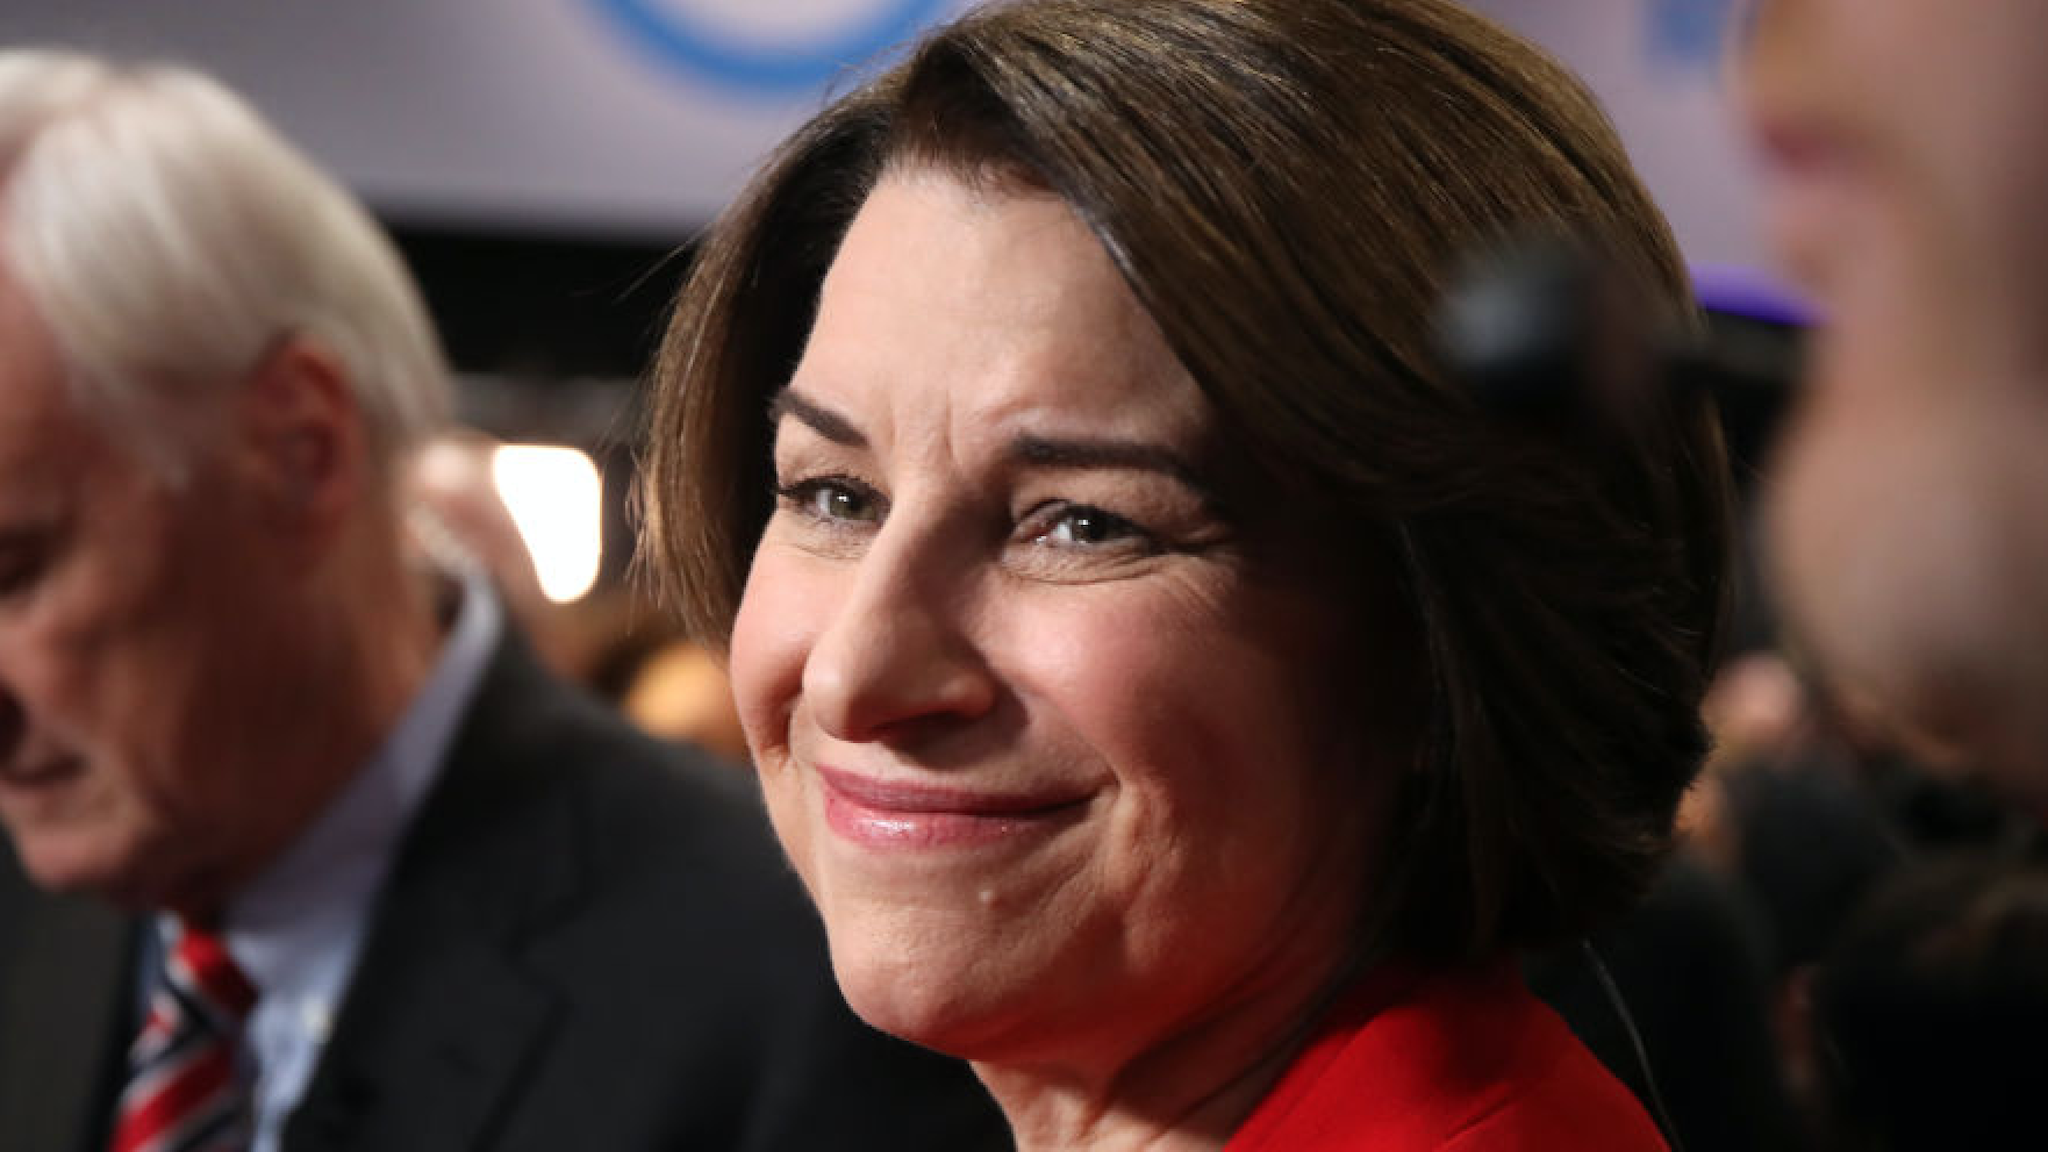 Sen. Amy Klobuchar (D-MN) prepares for television interview in spin room after the Democratic presidential primary debate at Drake University on January 14, 2020 in Des Moines, Iowa.